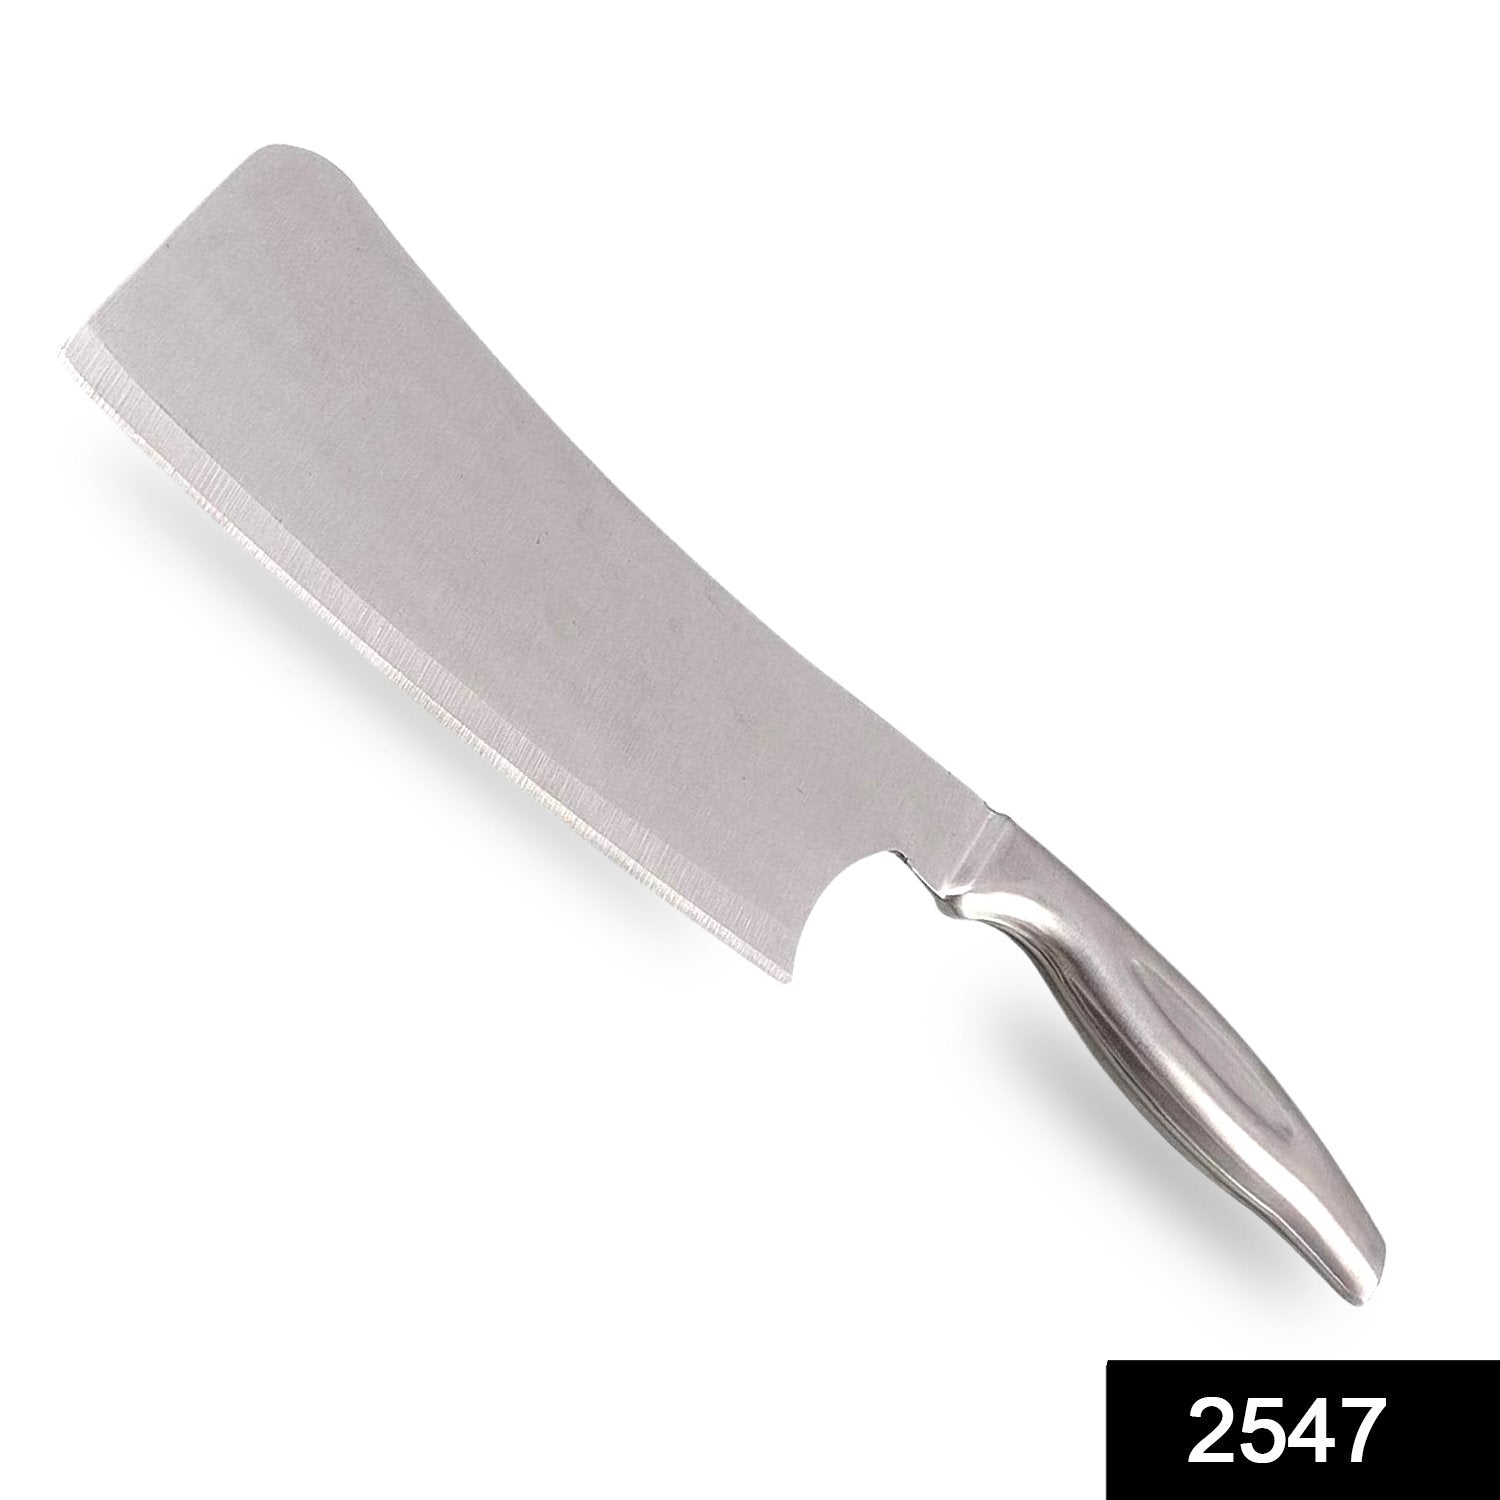 2547 Premium Stainless Steel Knives, Stainless Steel Handle Heavy Duty Blade (11 Inch)